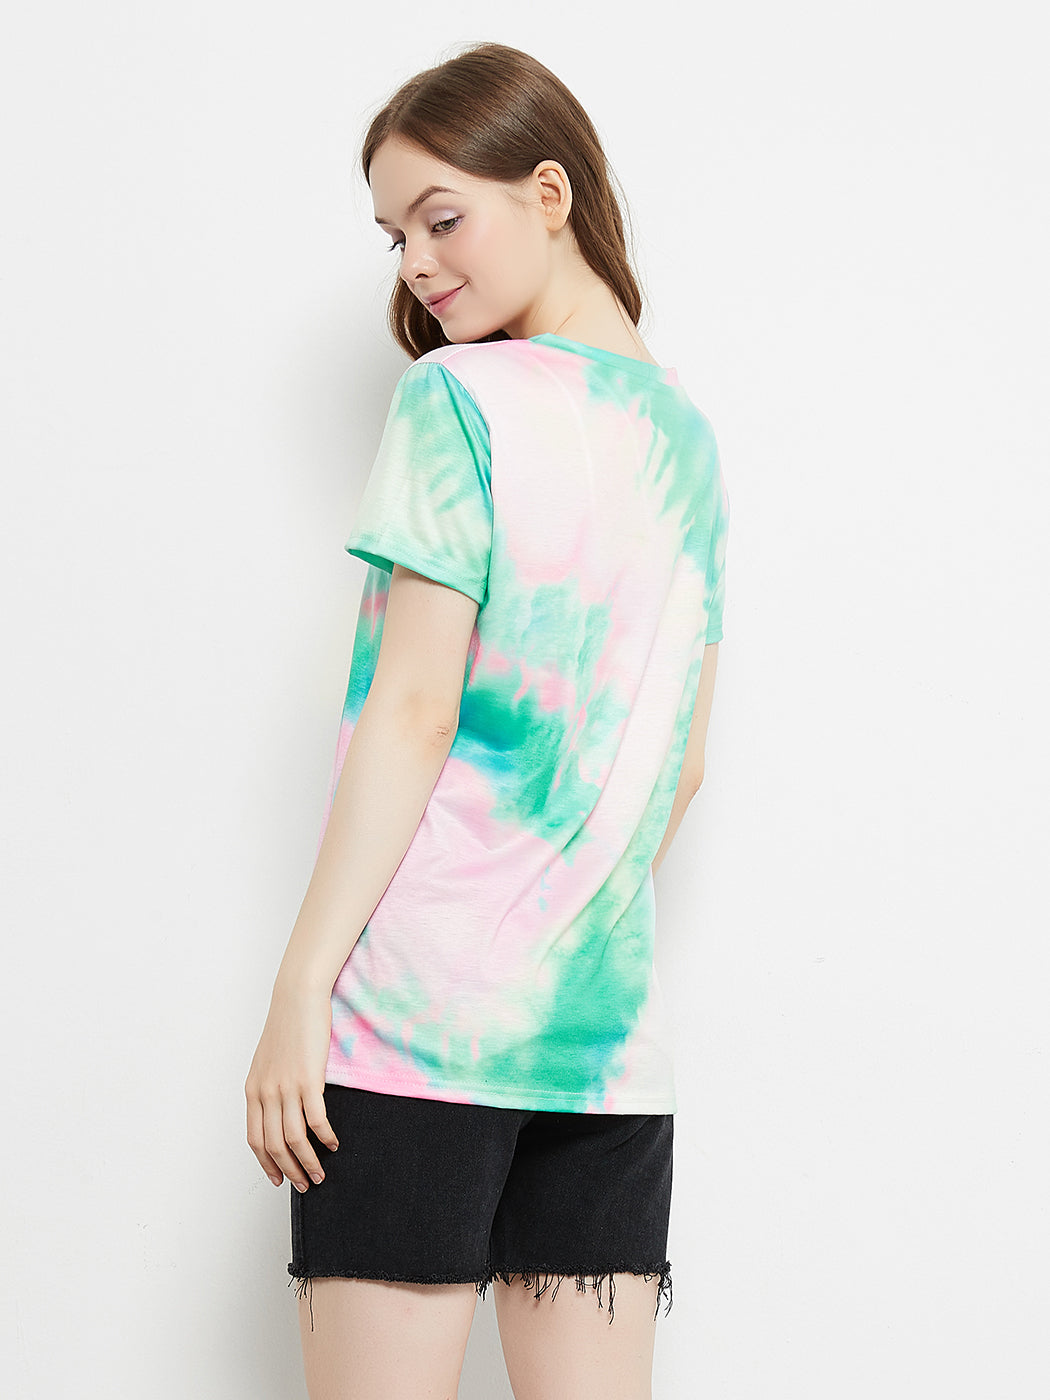 Tie Dye Printed Stripe V-Neck Stretch Short Sleeve Casual Loose Tops T-shirts